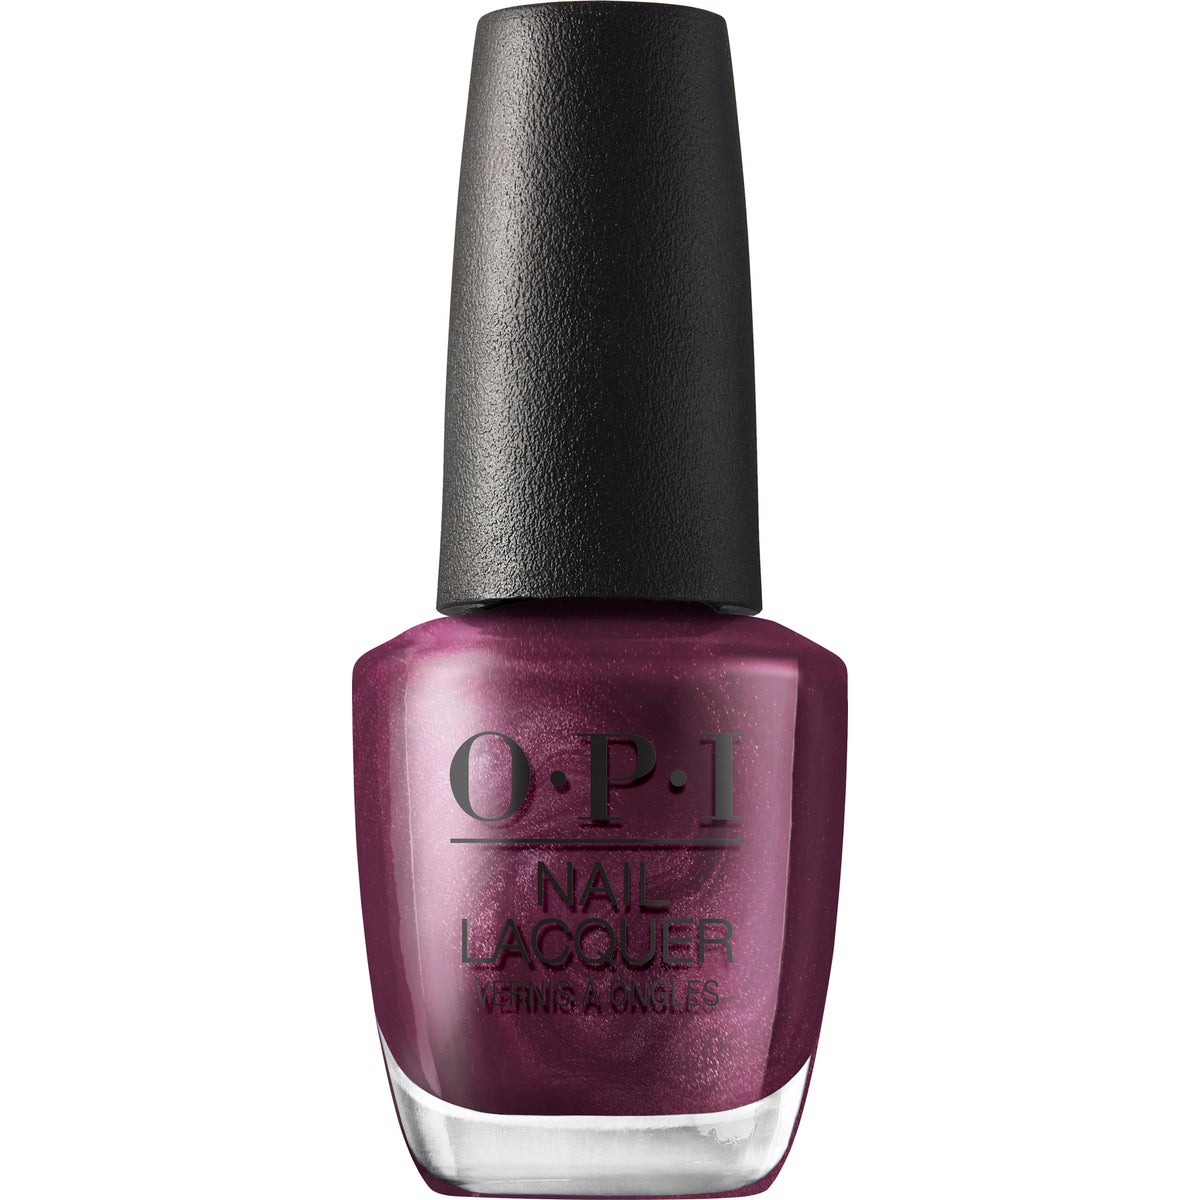 OPI Nail Lacquer Shine Bright - Dressed To The Wines